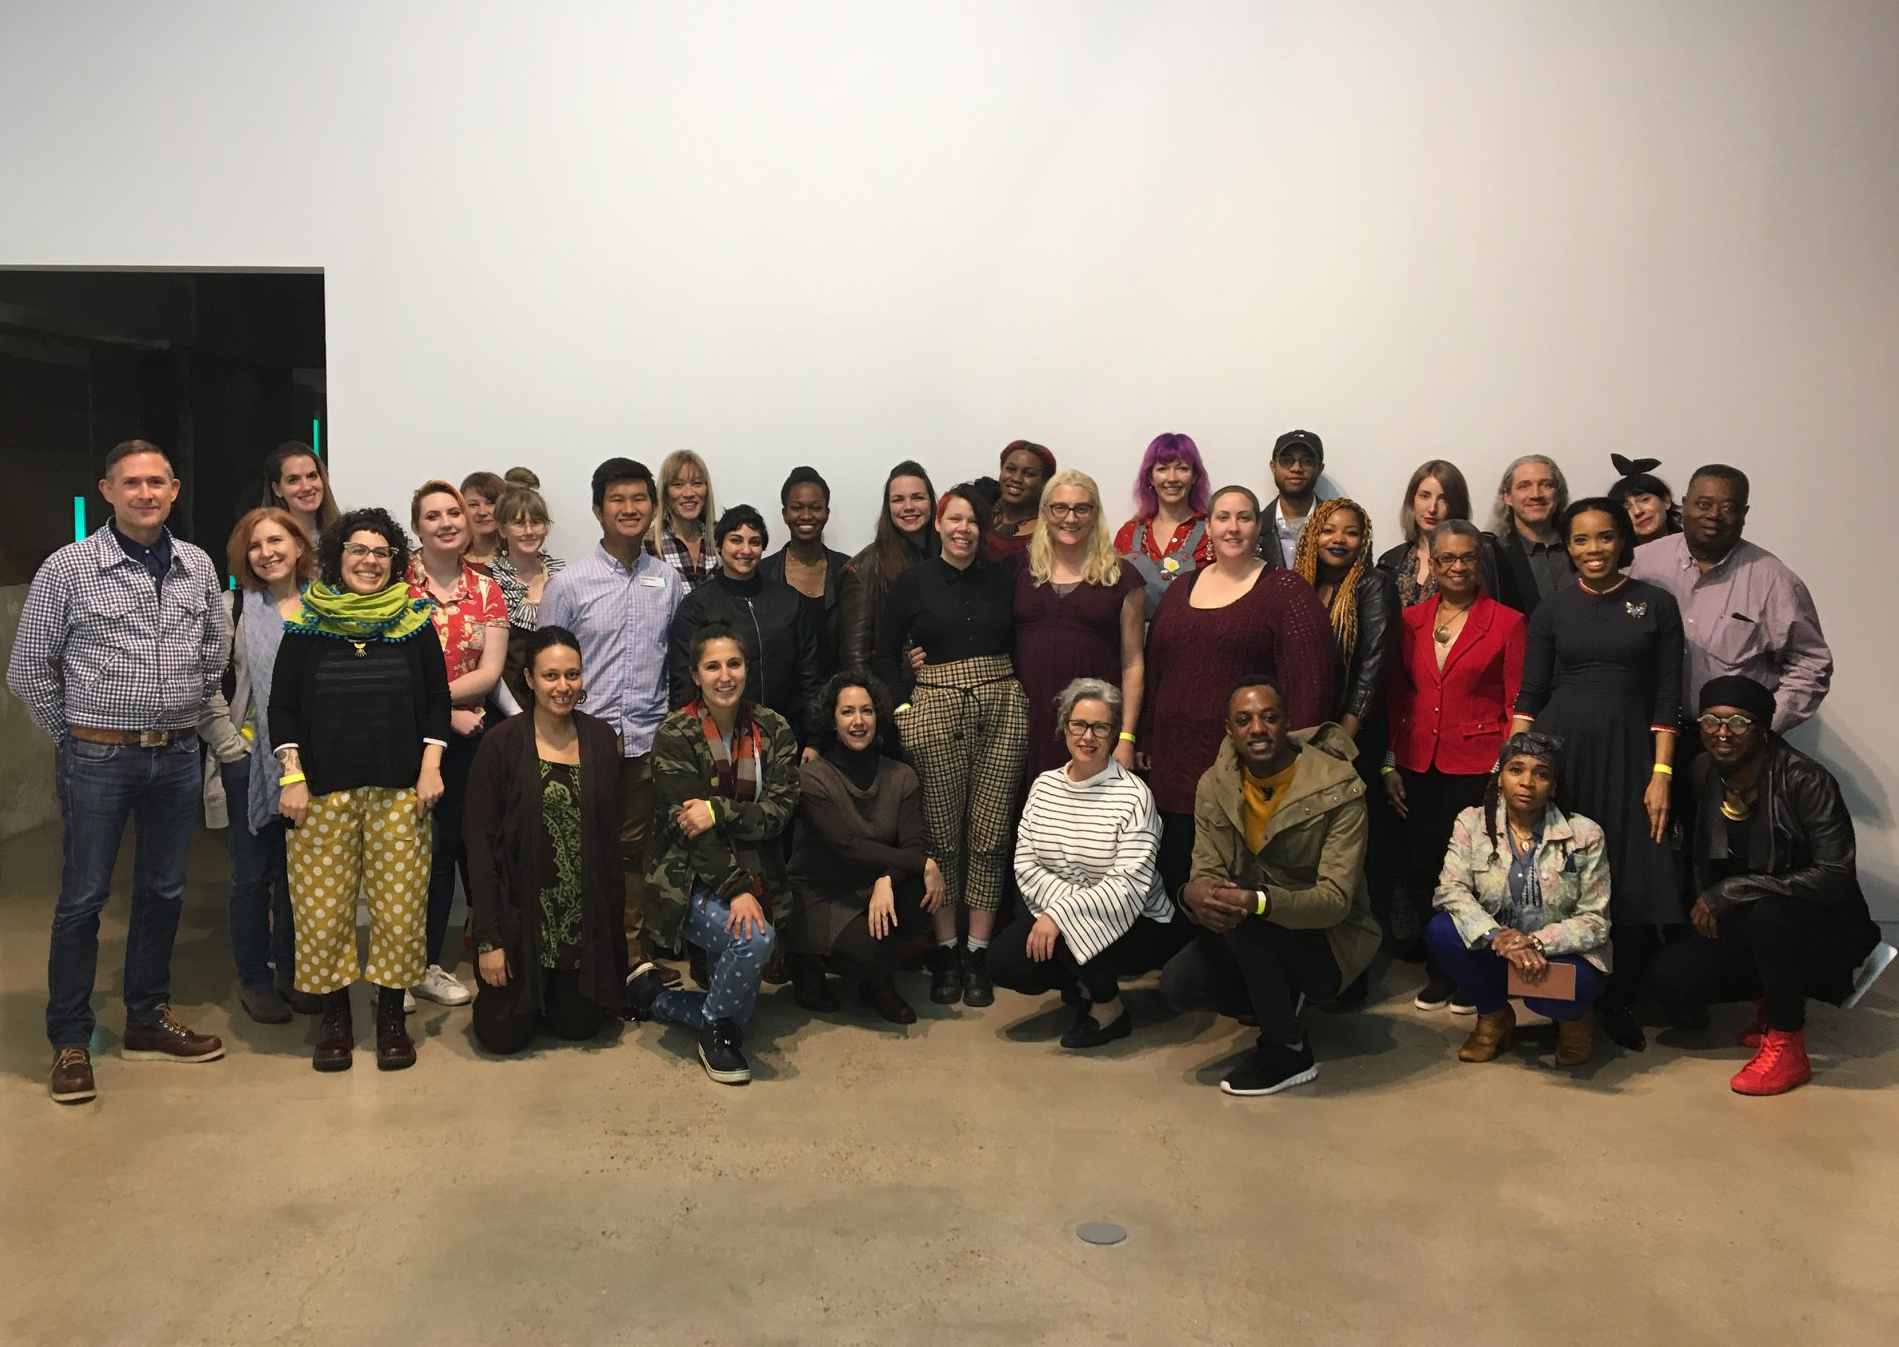  Attendees of the “Fashion &amp; Justice” workshop at The Contemporary Austin, February 2018.   Photo: Kimberly Jenkins    